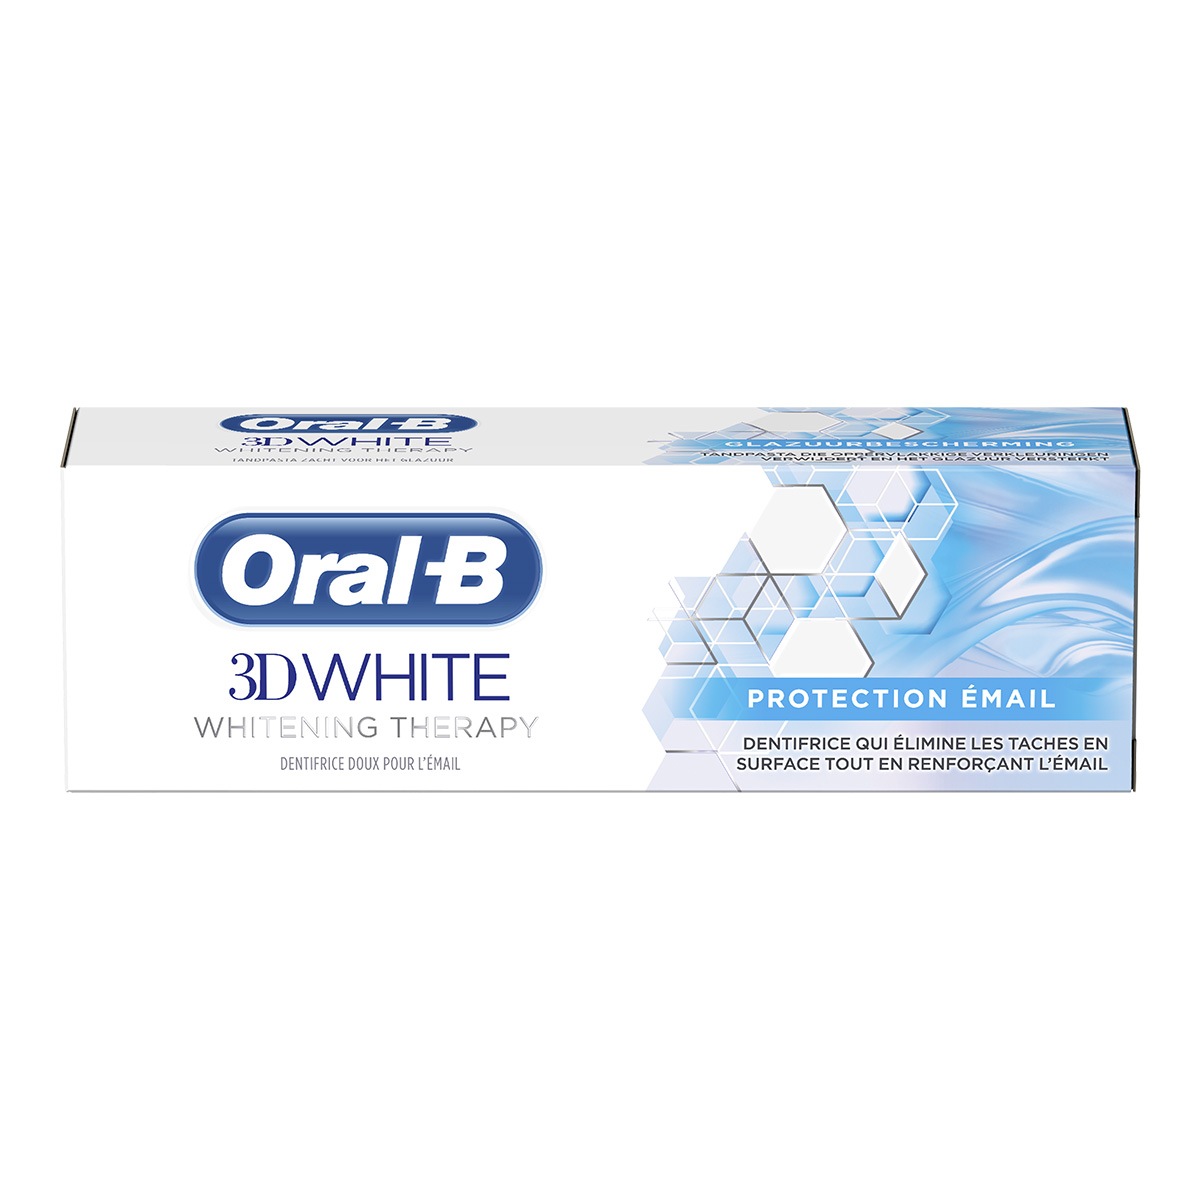 Oral-B 3D White Whitening Therapy Dentifrice 75 ml, Protection Émail undefined